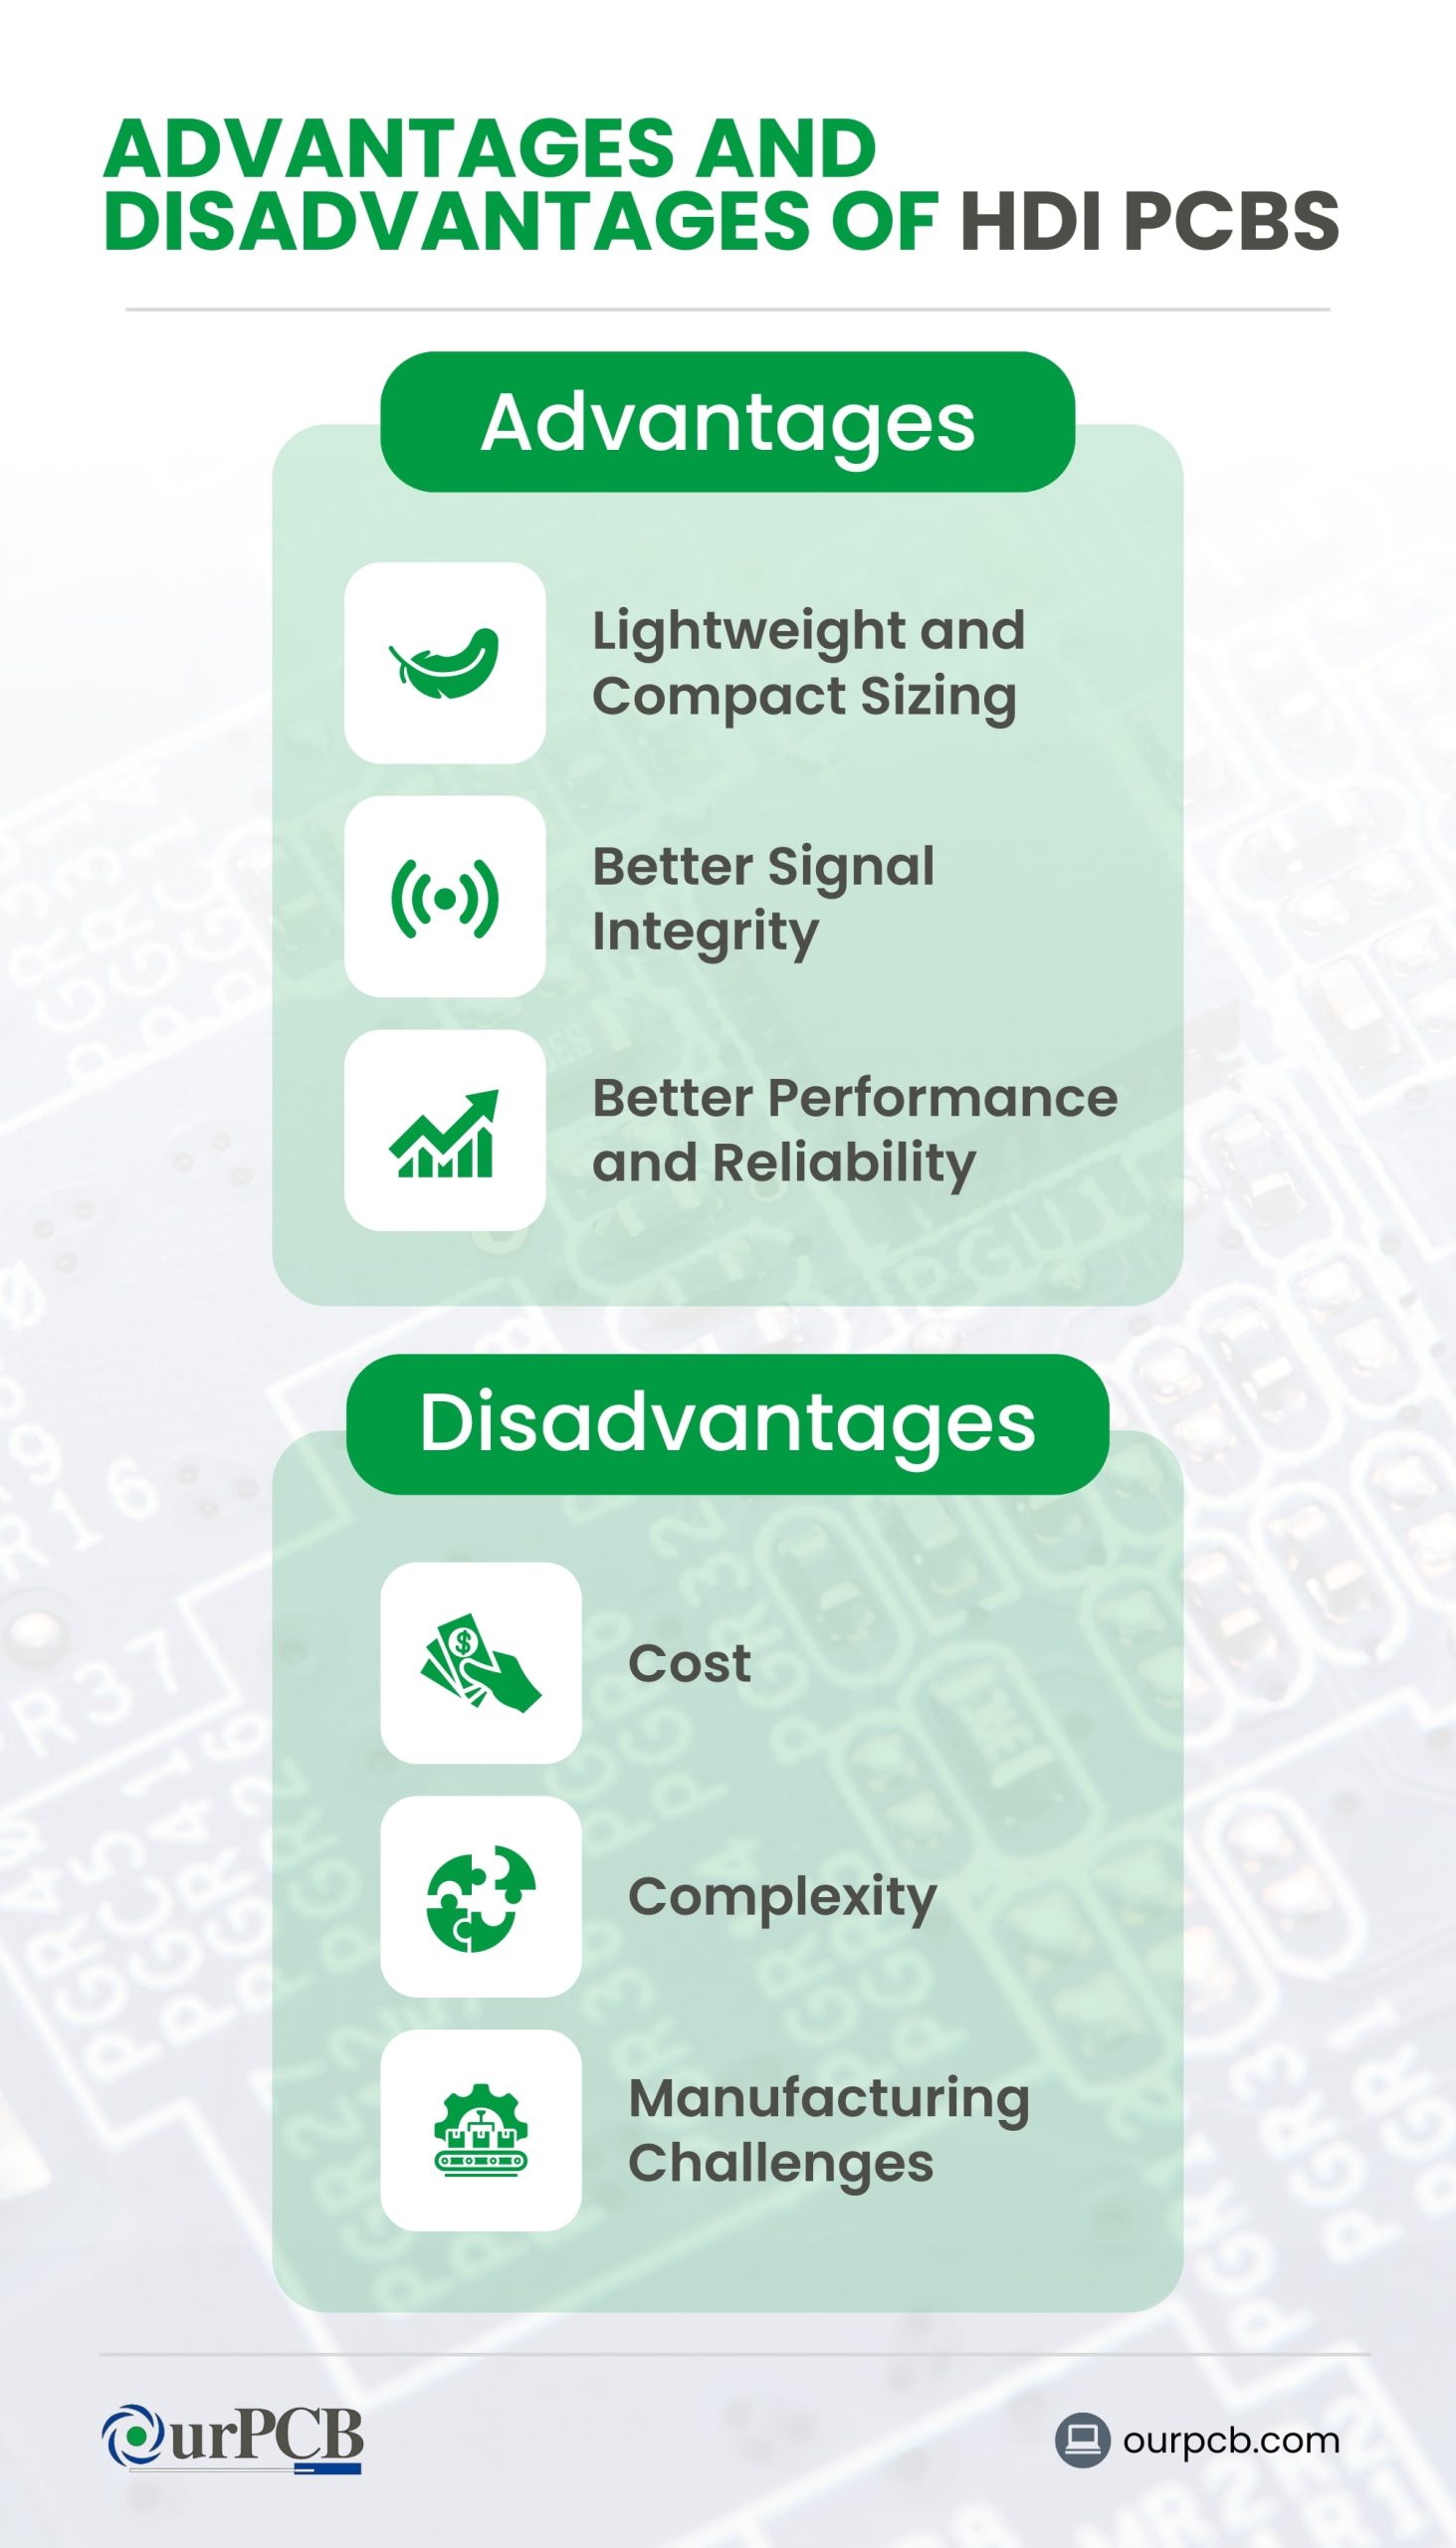 HDI PCBs Pros and Cons